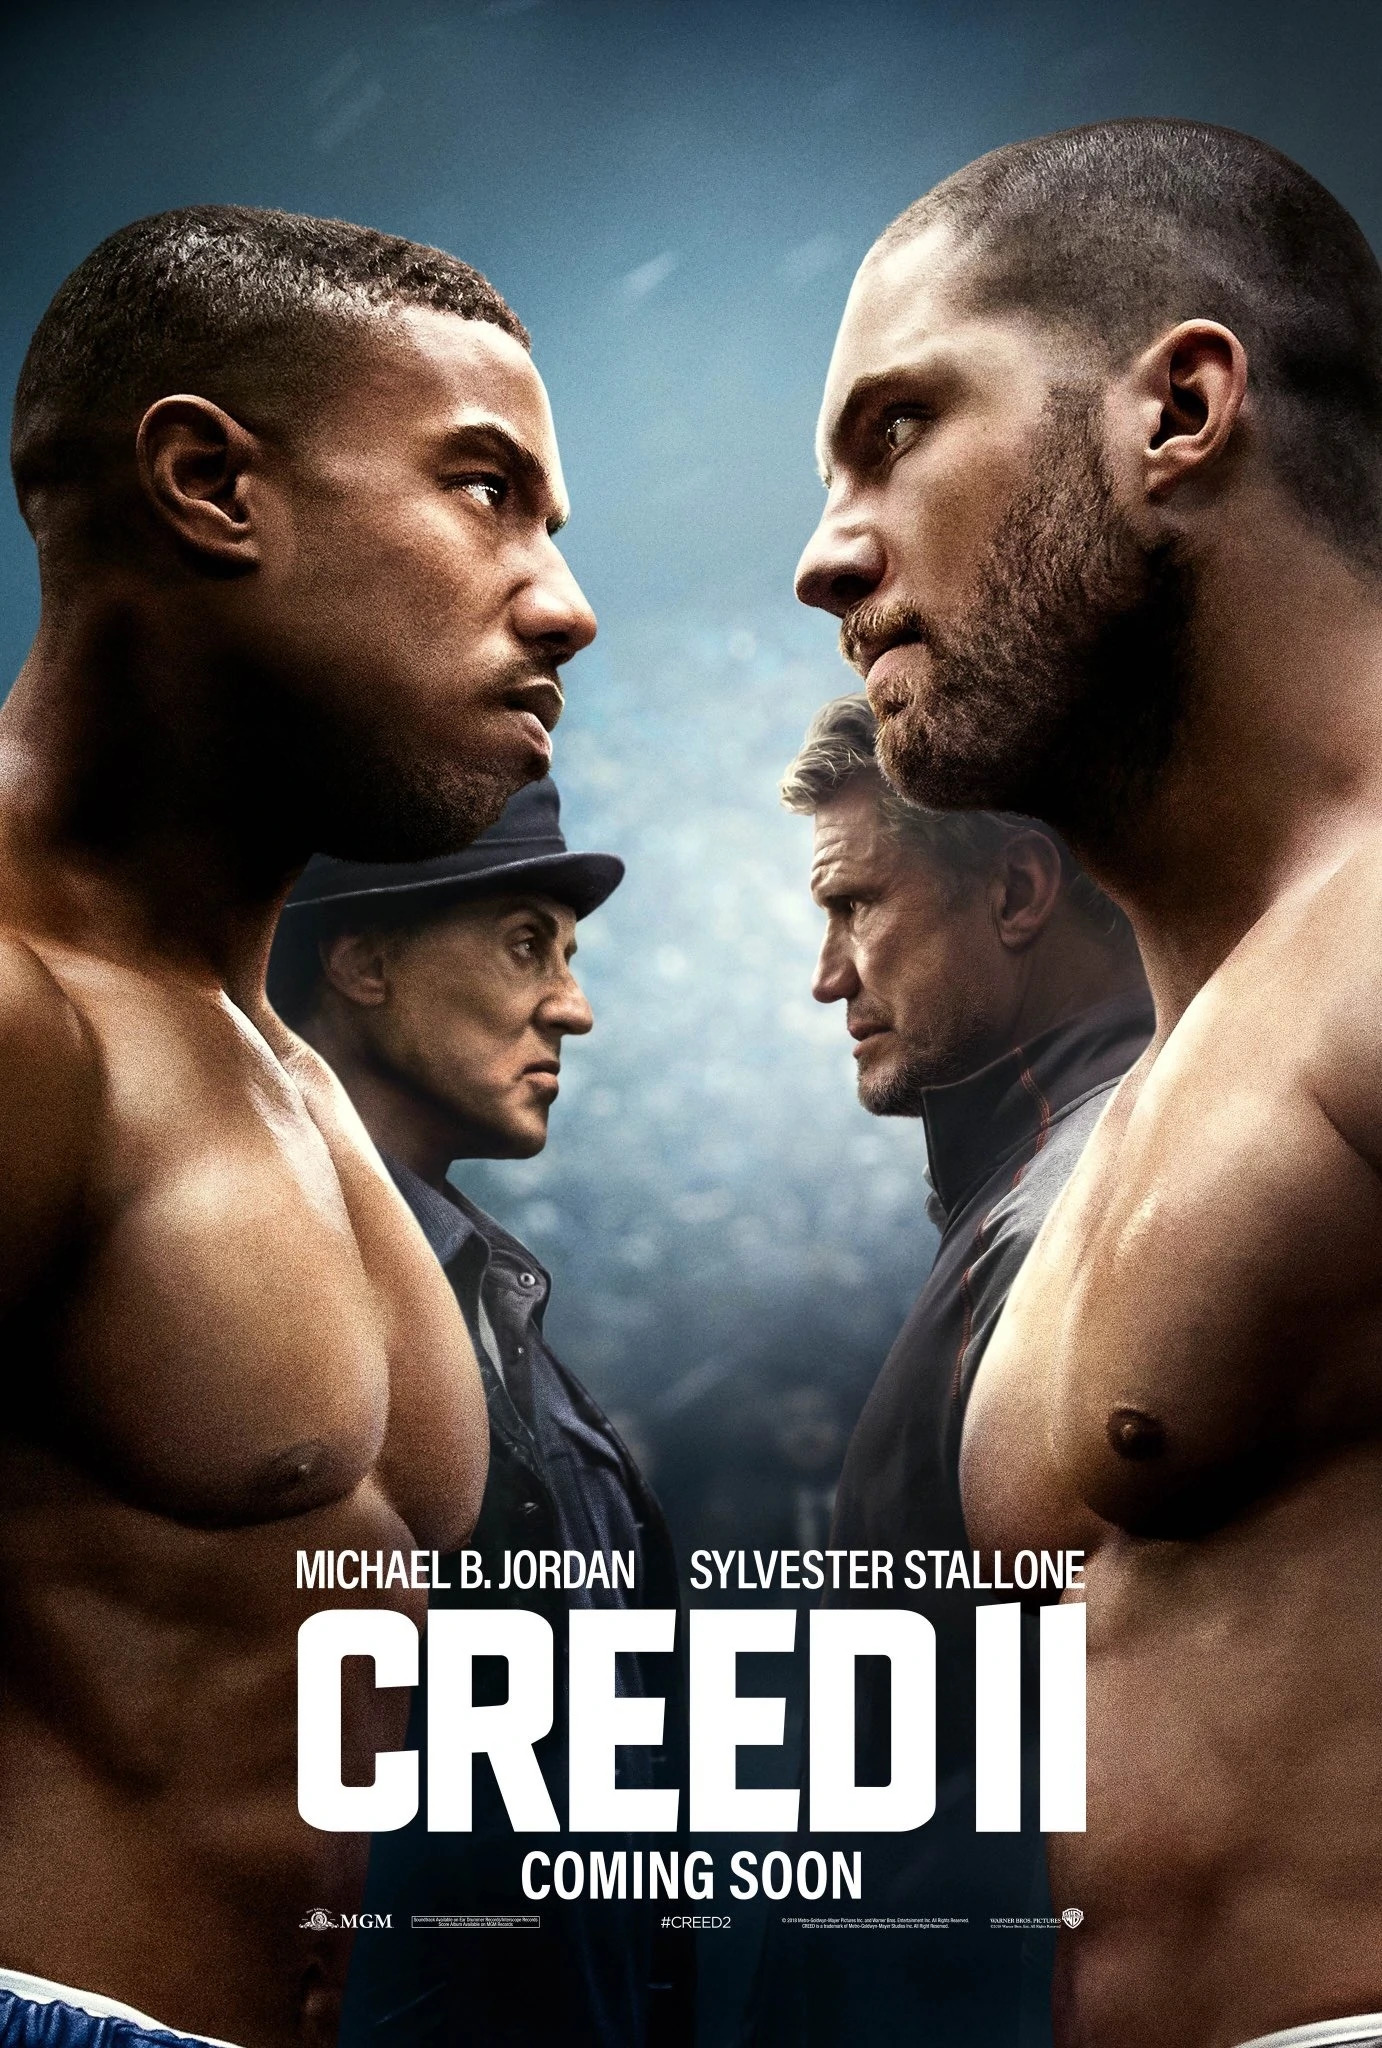 Download Creed II (2018) English Movie In 480p [450 MB] | 720p [1 GB] | 1080p [2 GB] on Techoffical